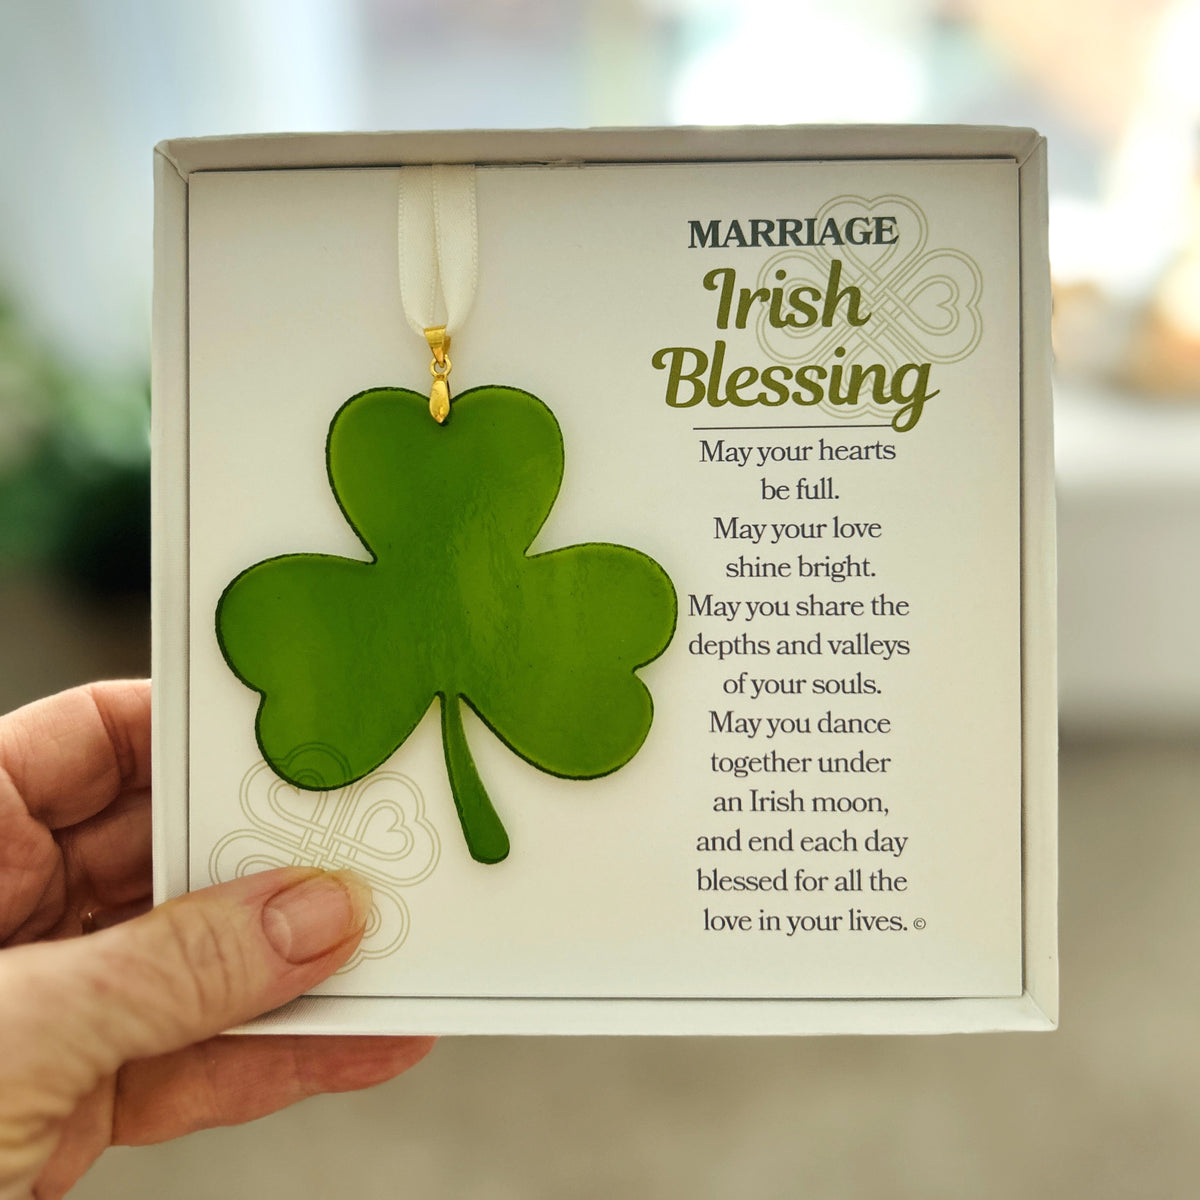 Marriage Irish Blessing anniversary gift being held in a hand.